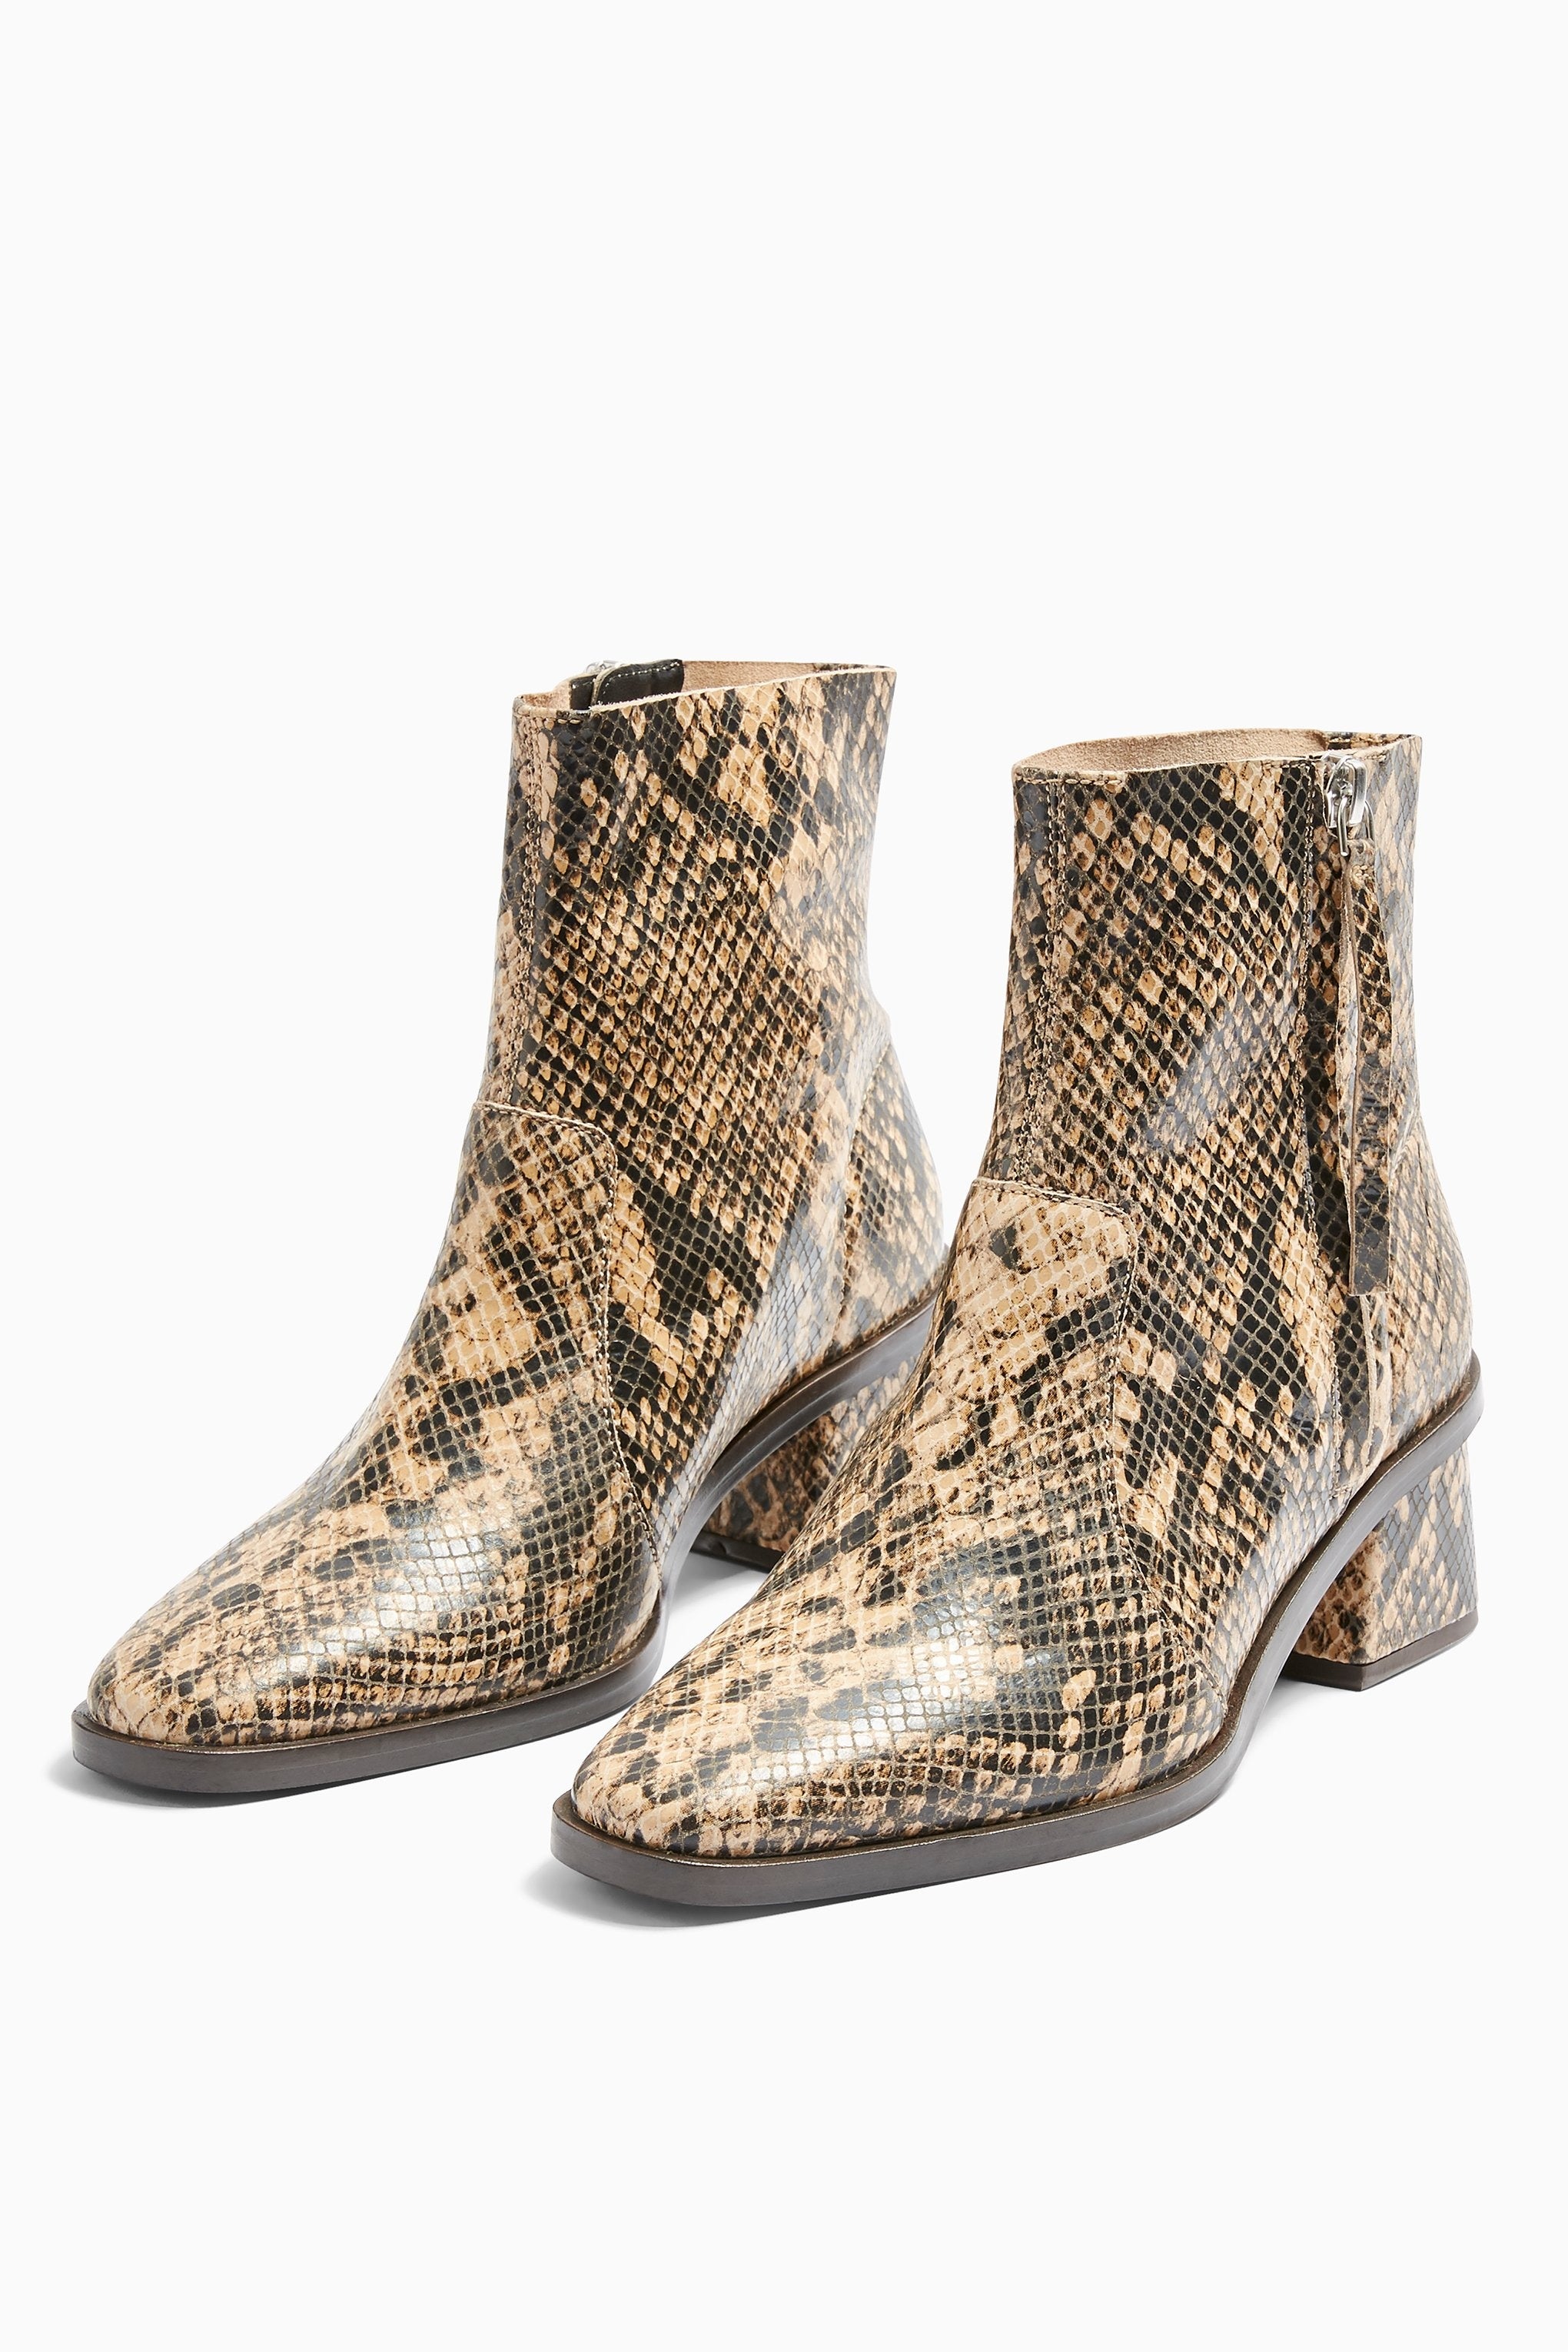 Topshop + MARGOT Leather Snake Mid Boots